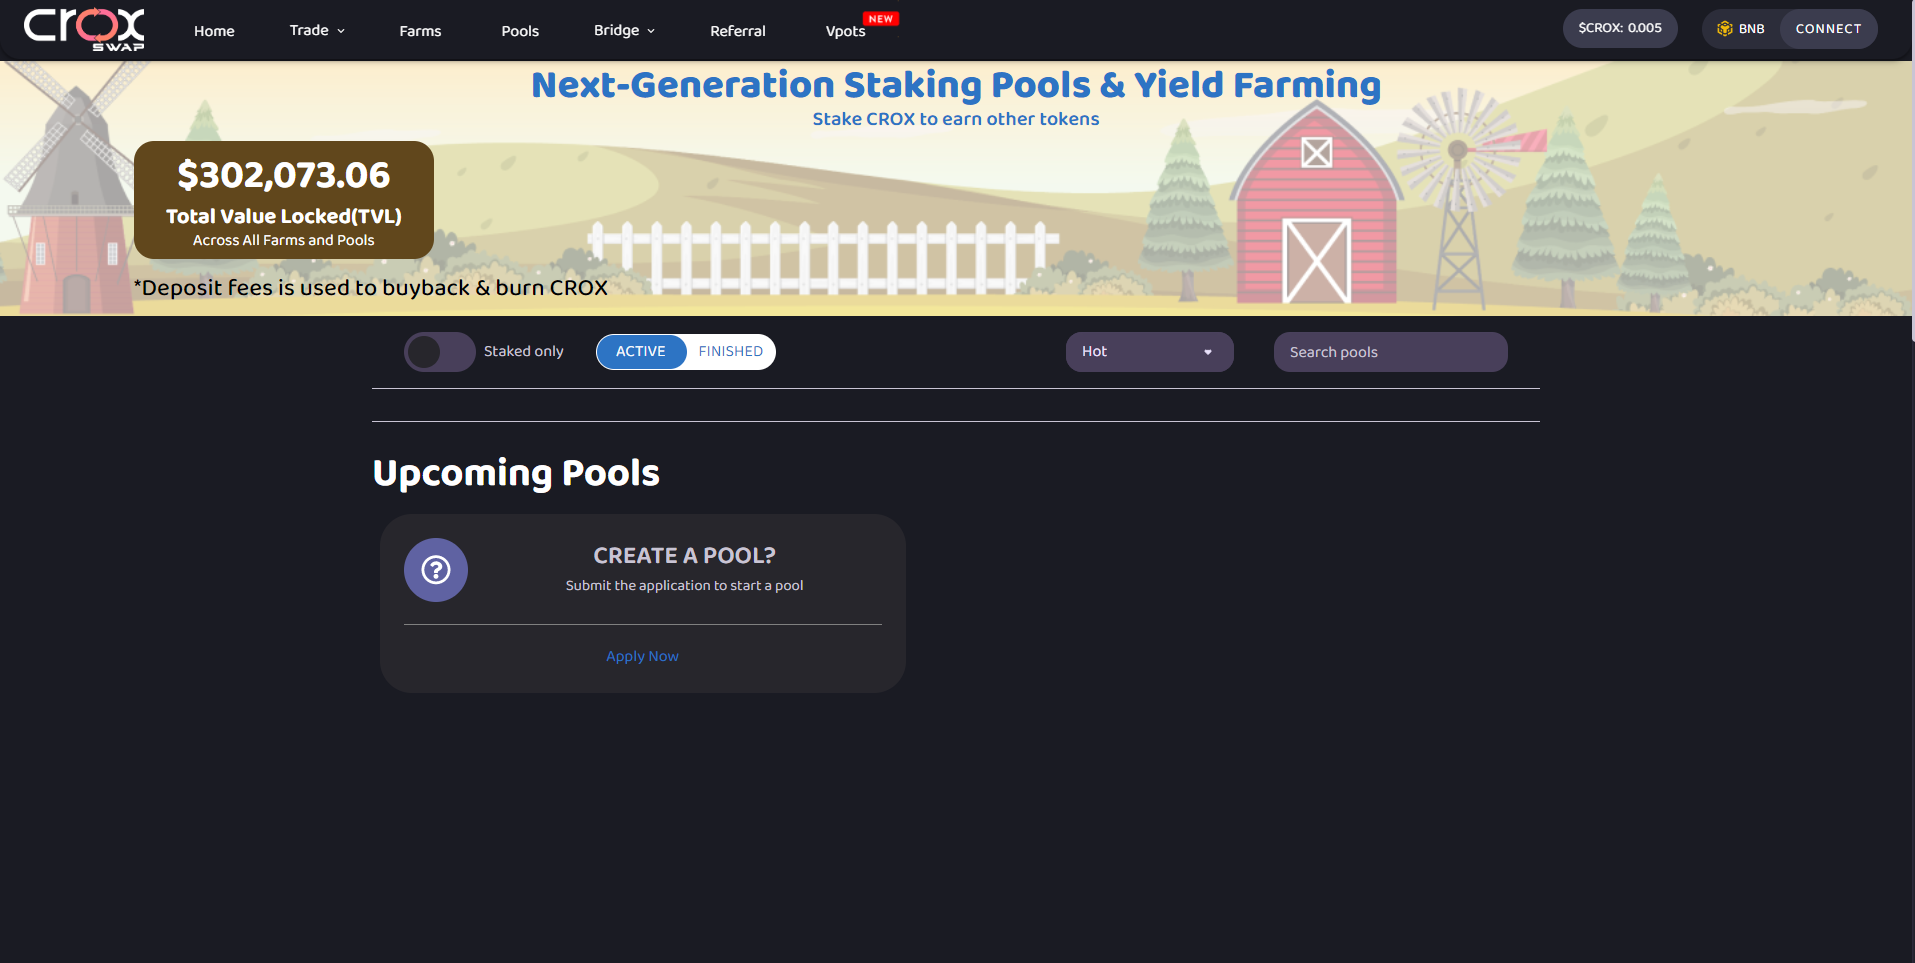 (0 ) GTS PSV, PE Tp
Ls]

Next-Generation Staking Pools & Yield Farming

Stake CROX to earn other tokens

$302,073.06

Total Value Locked(TVL)
Across All Farms and Pools.

‘Deposit fees is used to buyback & burn CROX

ERICA) 0) os 5 Search pools

 

TTT LE

©) CREATE A POOL?